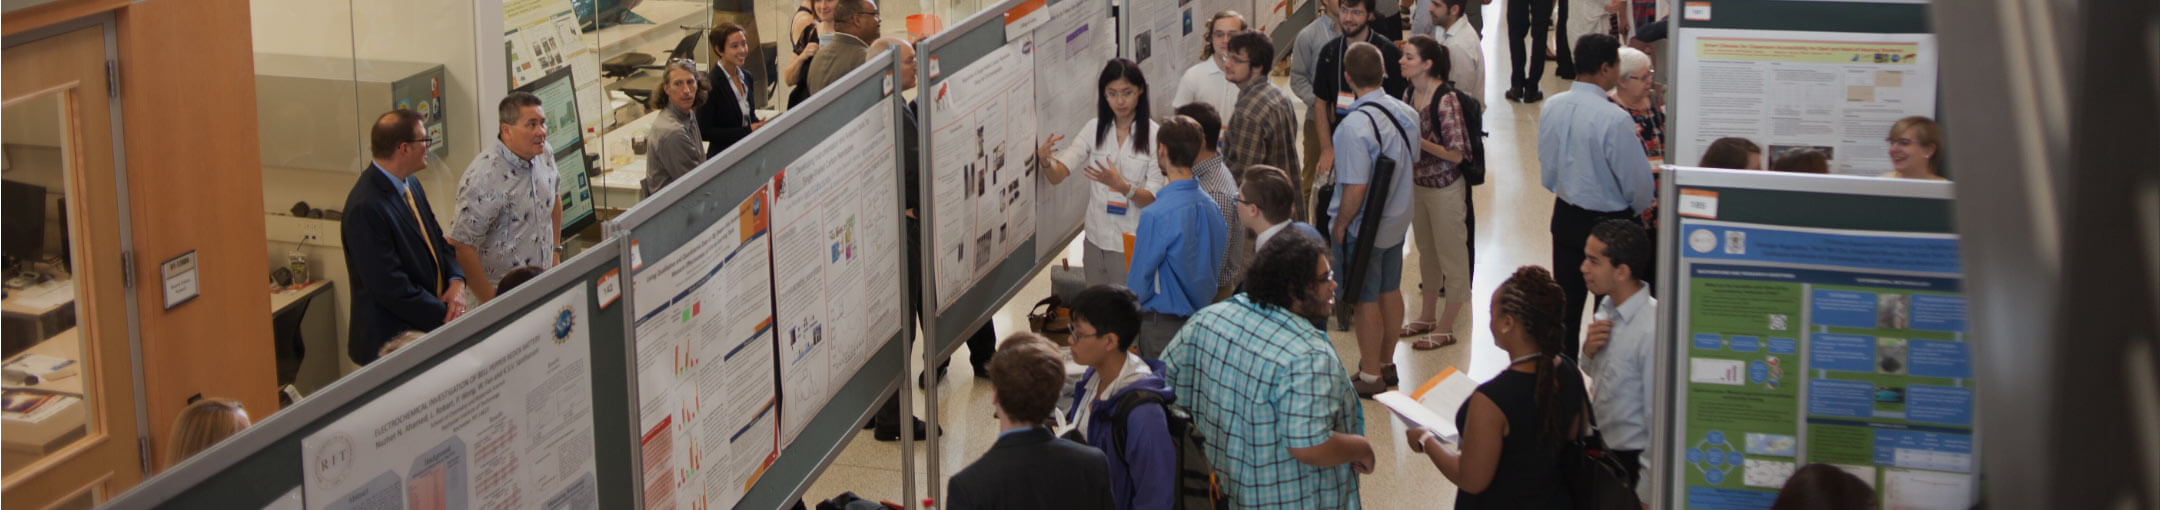 Participants and attendees of a previous Undergraduate Research Symposium viewing various exhibits.